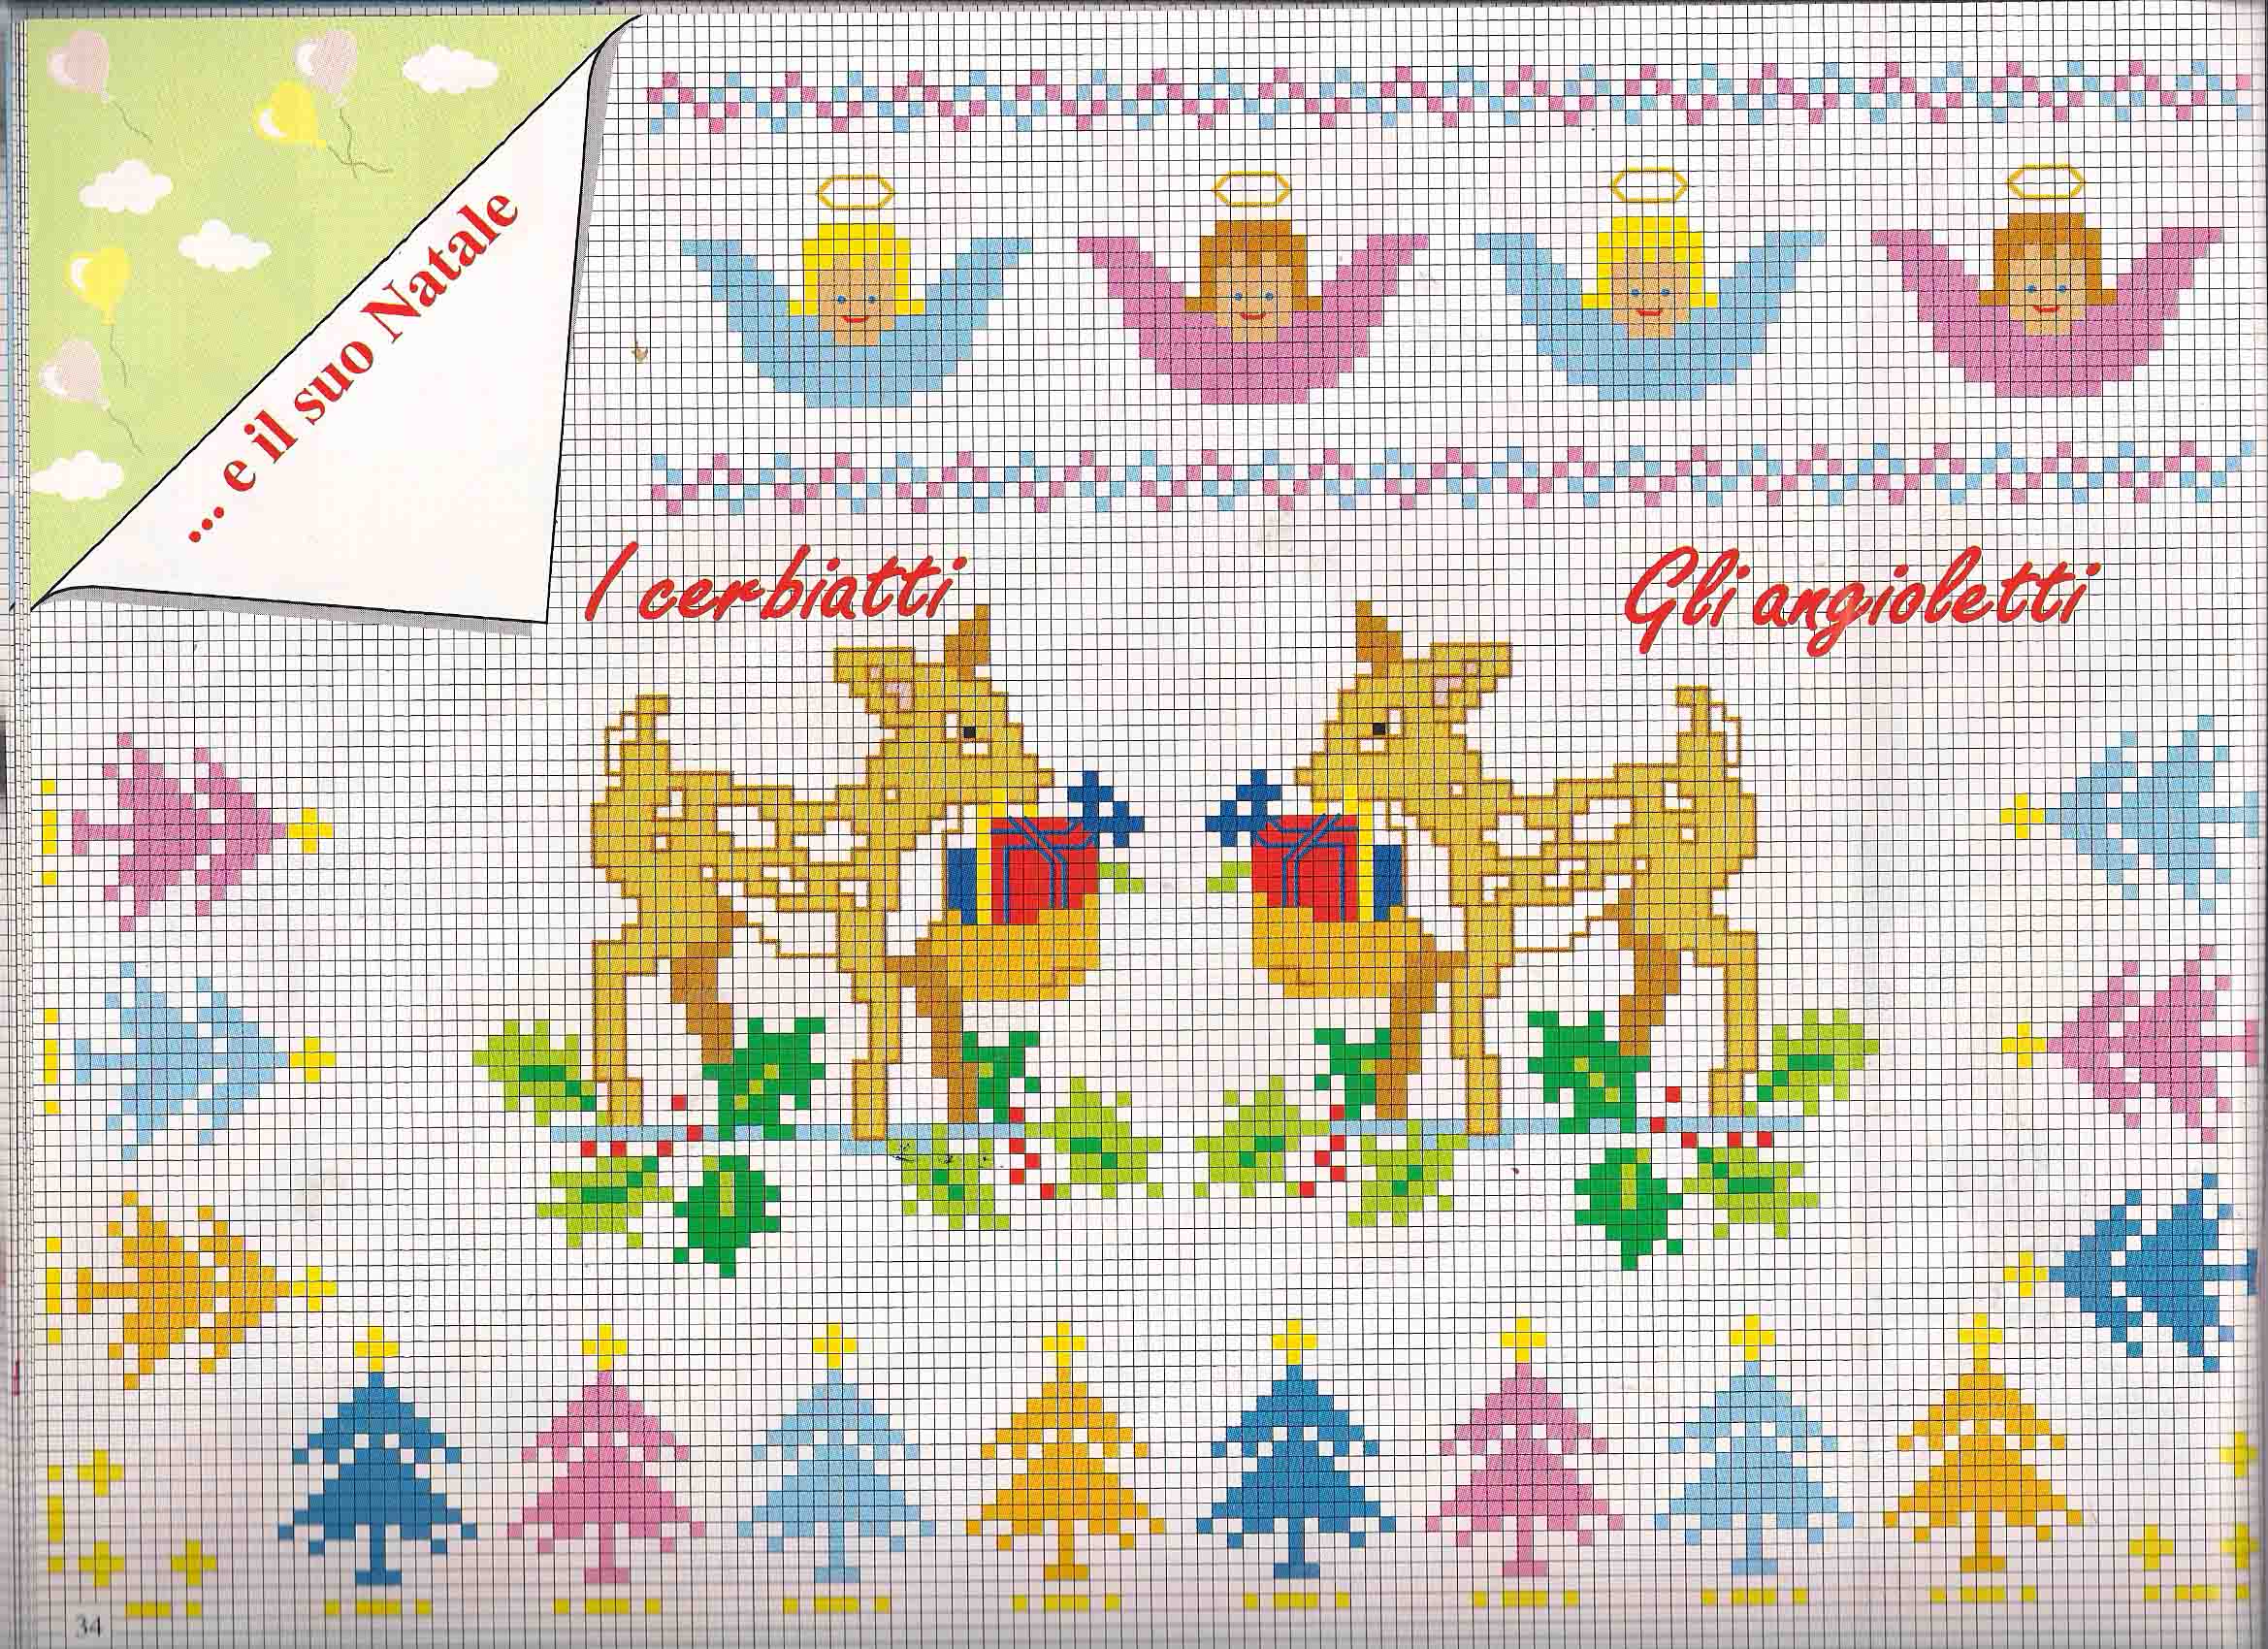 Fawns and angels cross stitch patterns